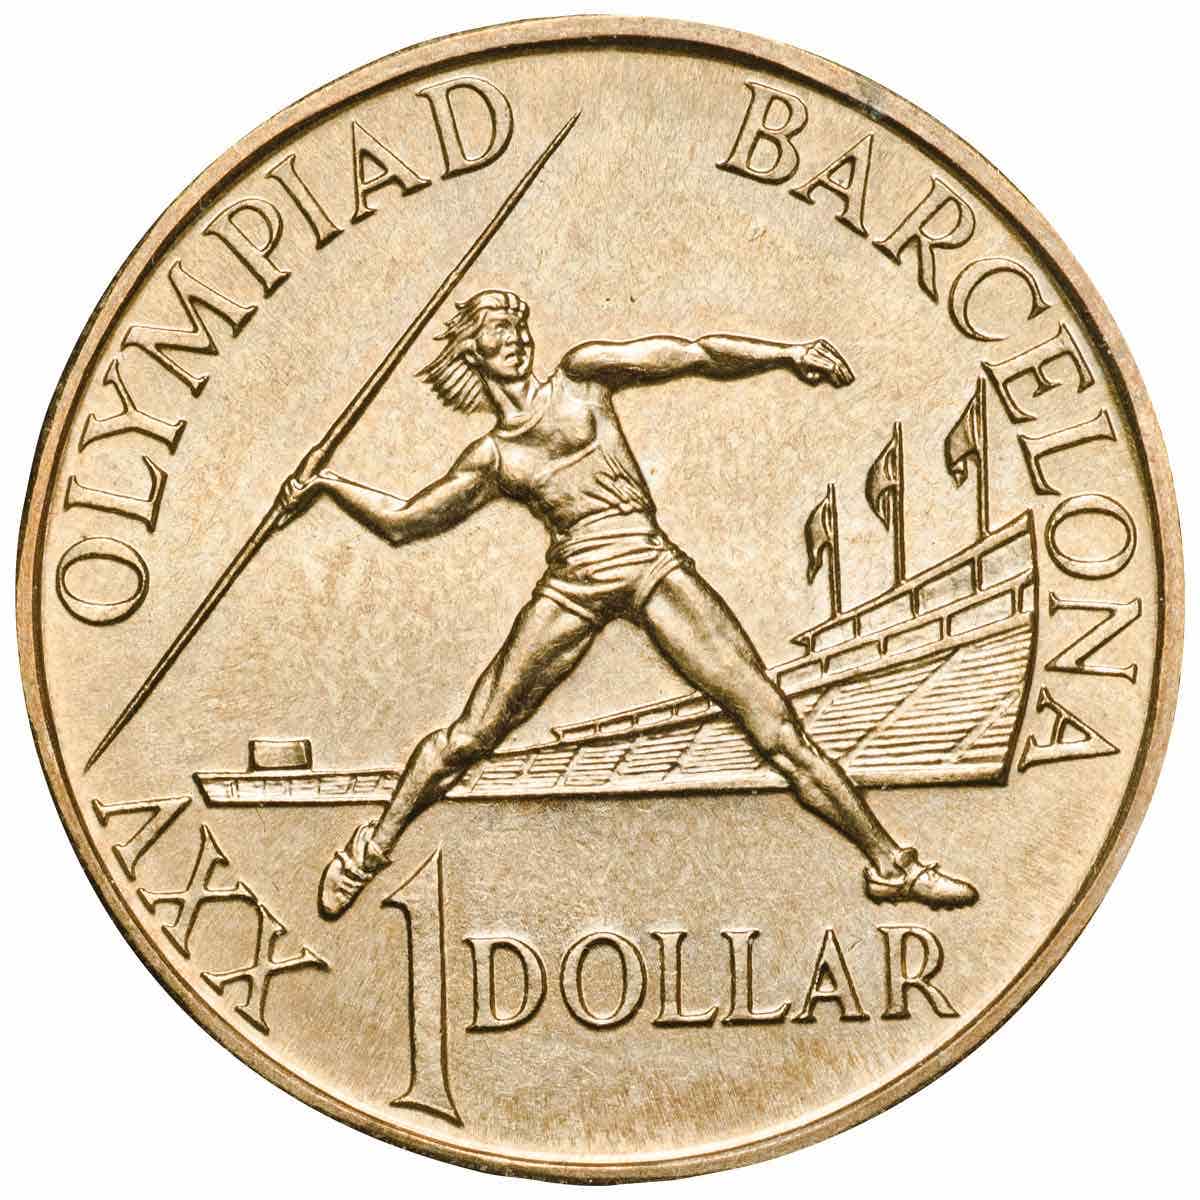 Barcelona Olympics 1992 $1 Mint Your Own Coin